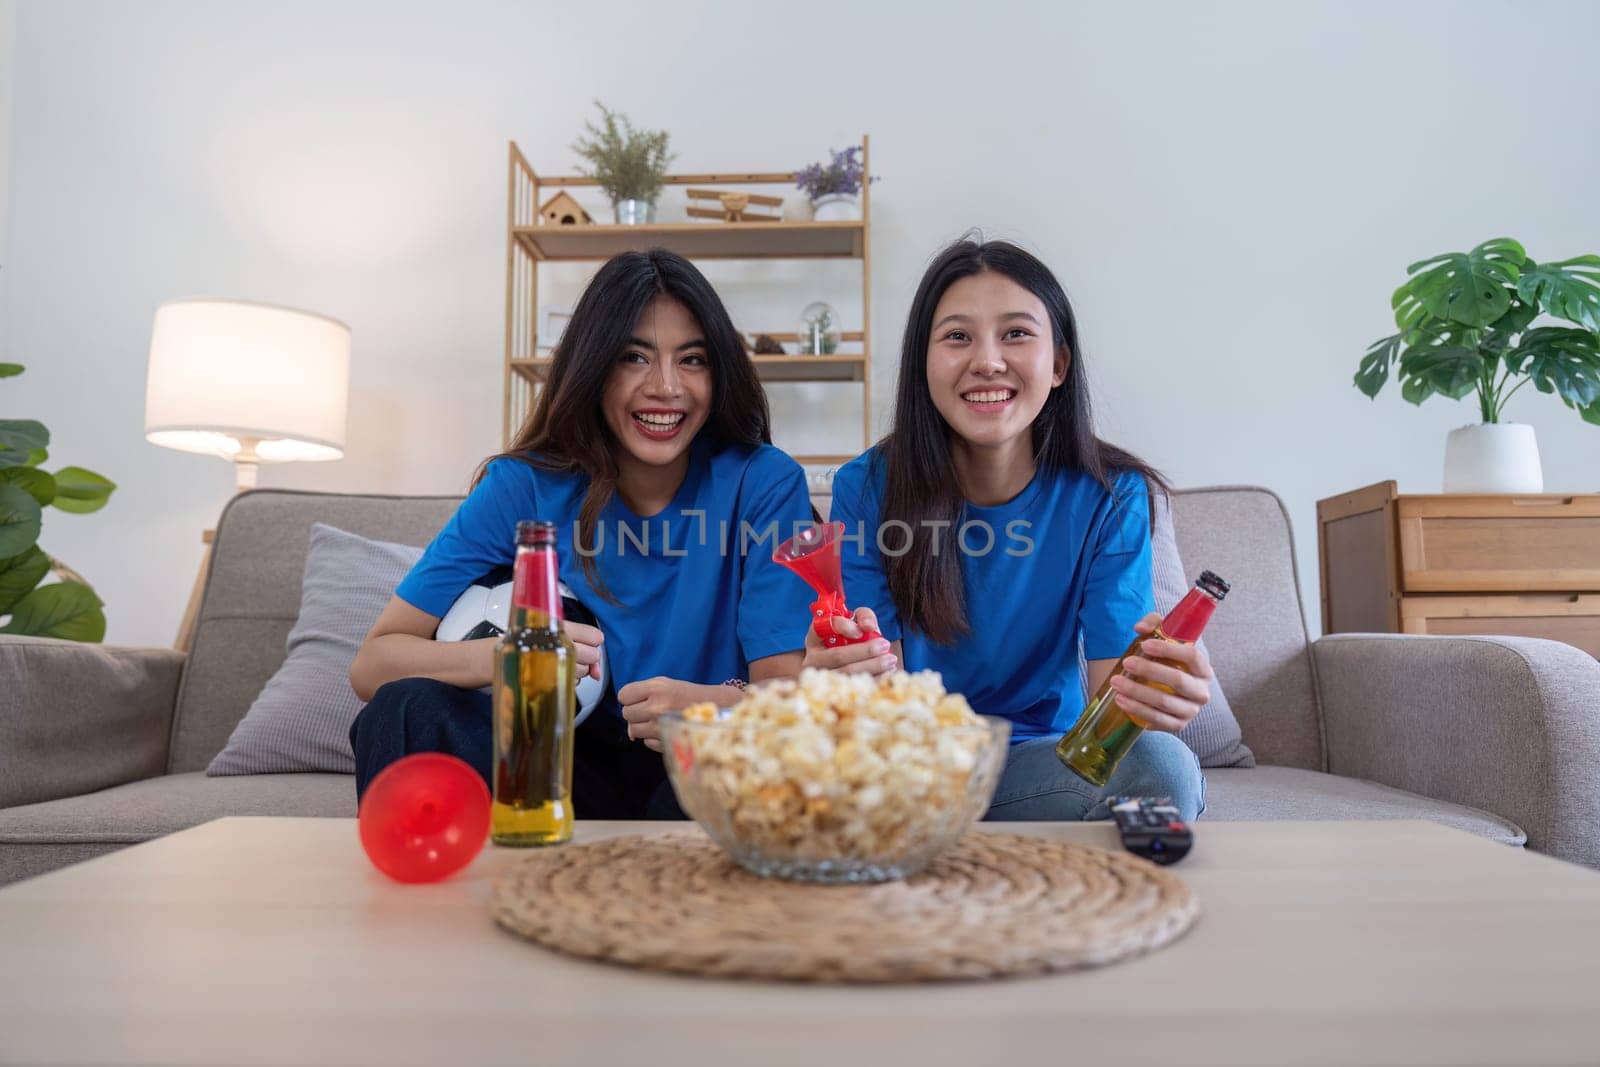 Lesbian couple cheering for Euro football with drinks and popcorn at home. Concept of sports enthusiasm and LGBTQ pride by nateemee